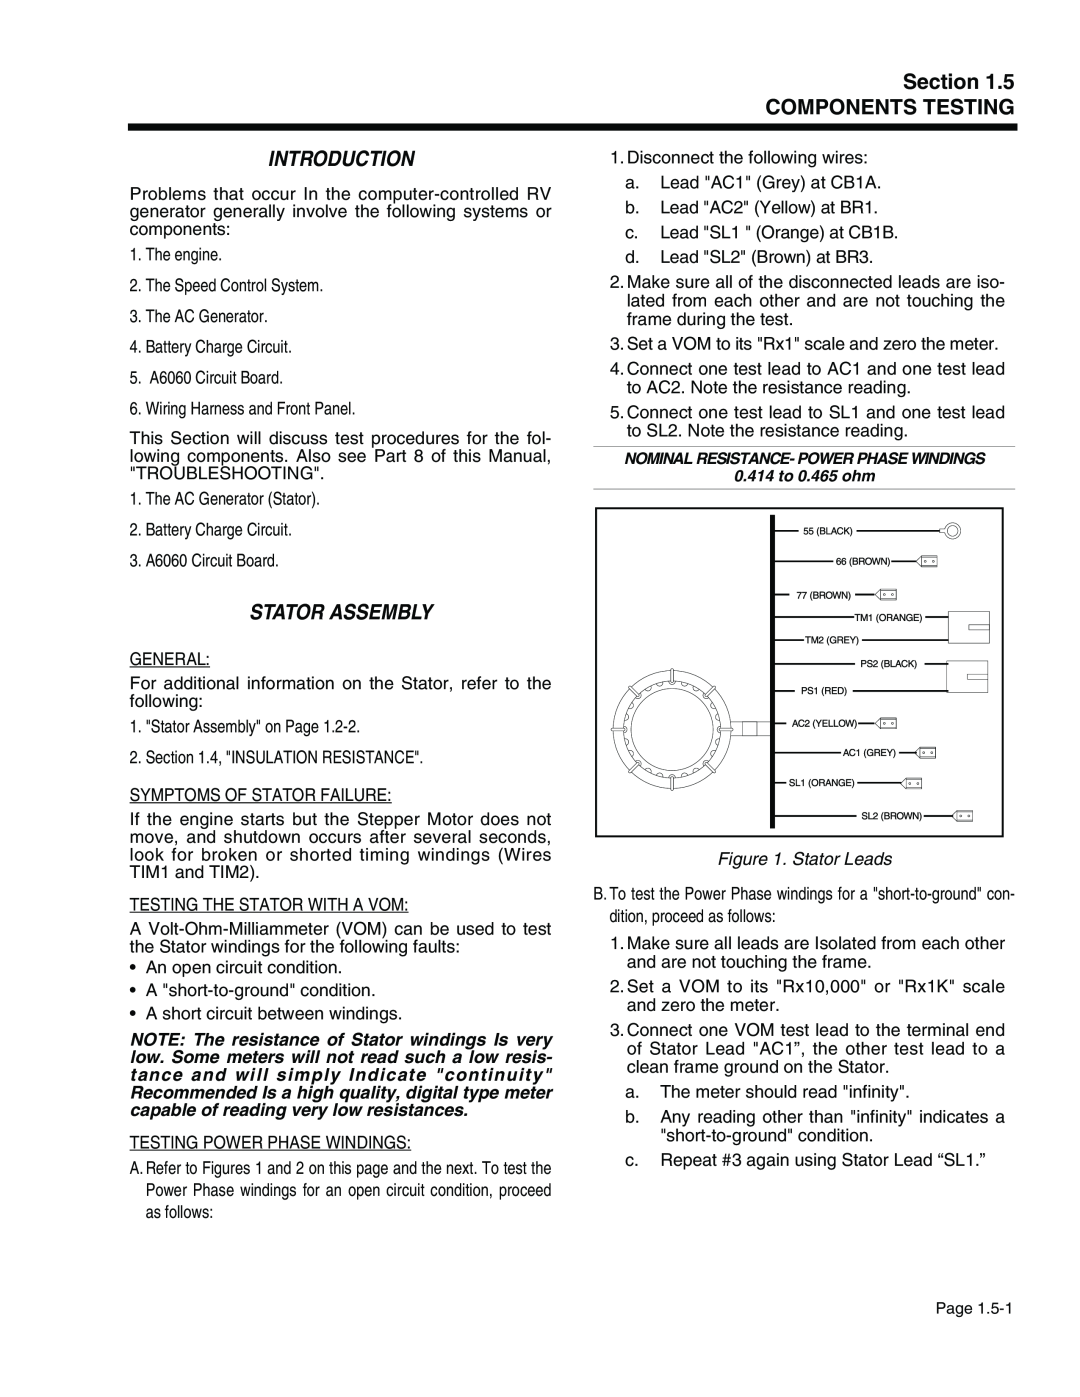 Generac Power Systems 941-2, 940-2 service manual Section COMPONENTS TESTING, Stator Leads, Introduction, Stator Assembly 